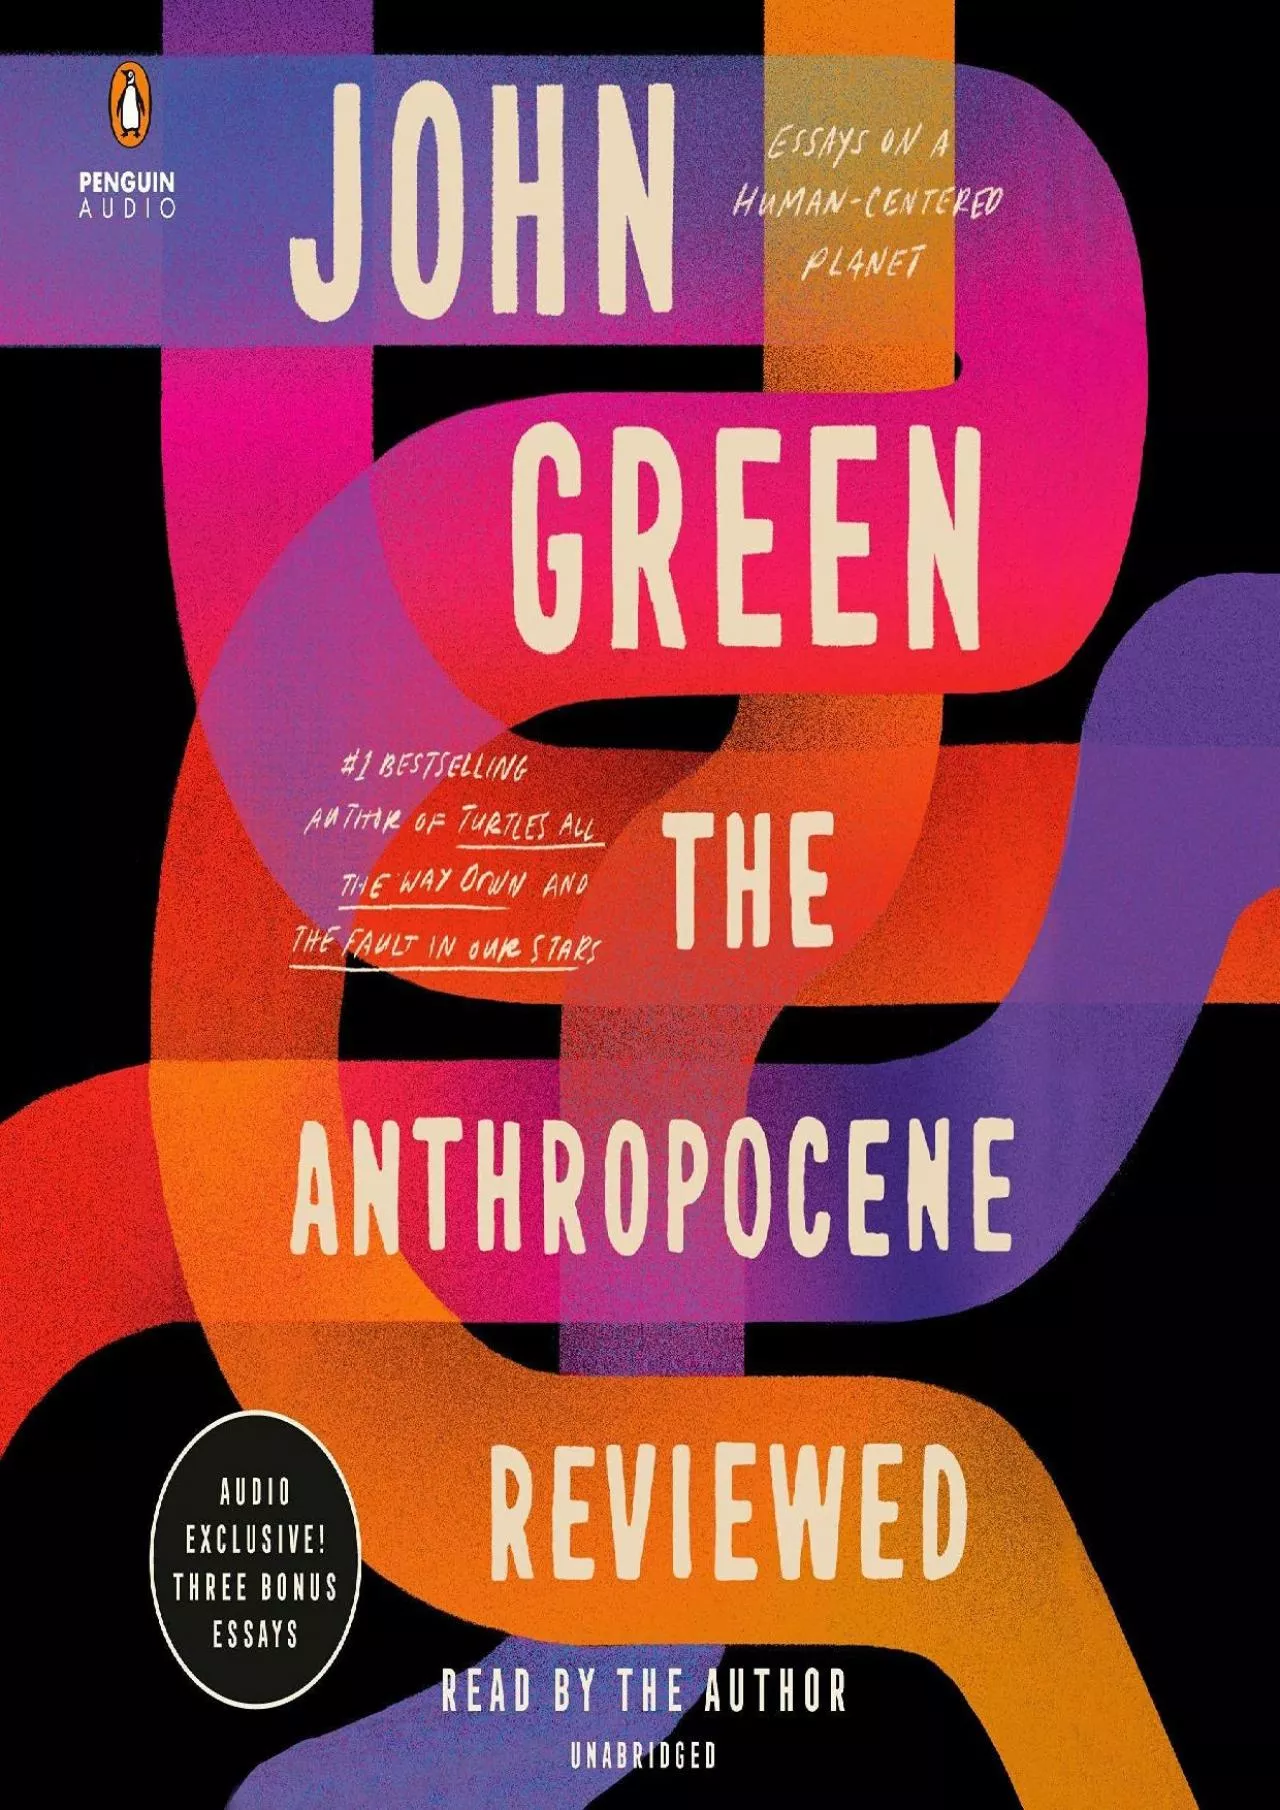 (BOOS)-The Anthropocene Reviewed: Essays on a Human-Centered Planet